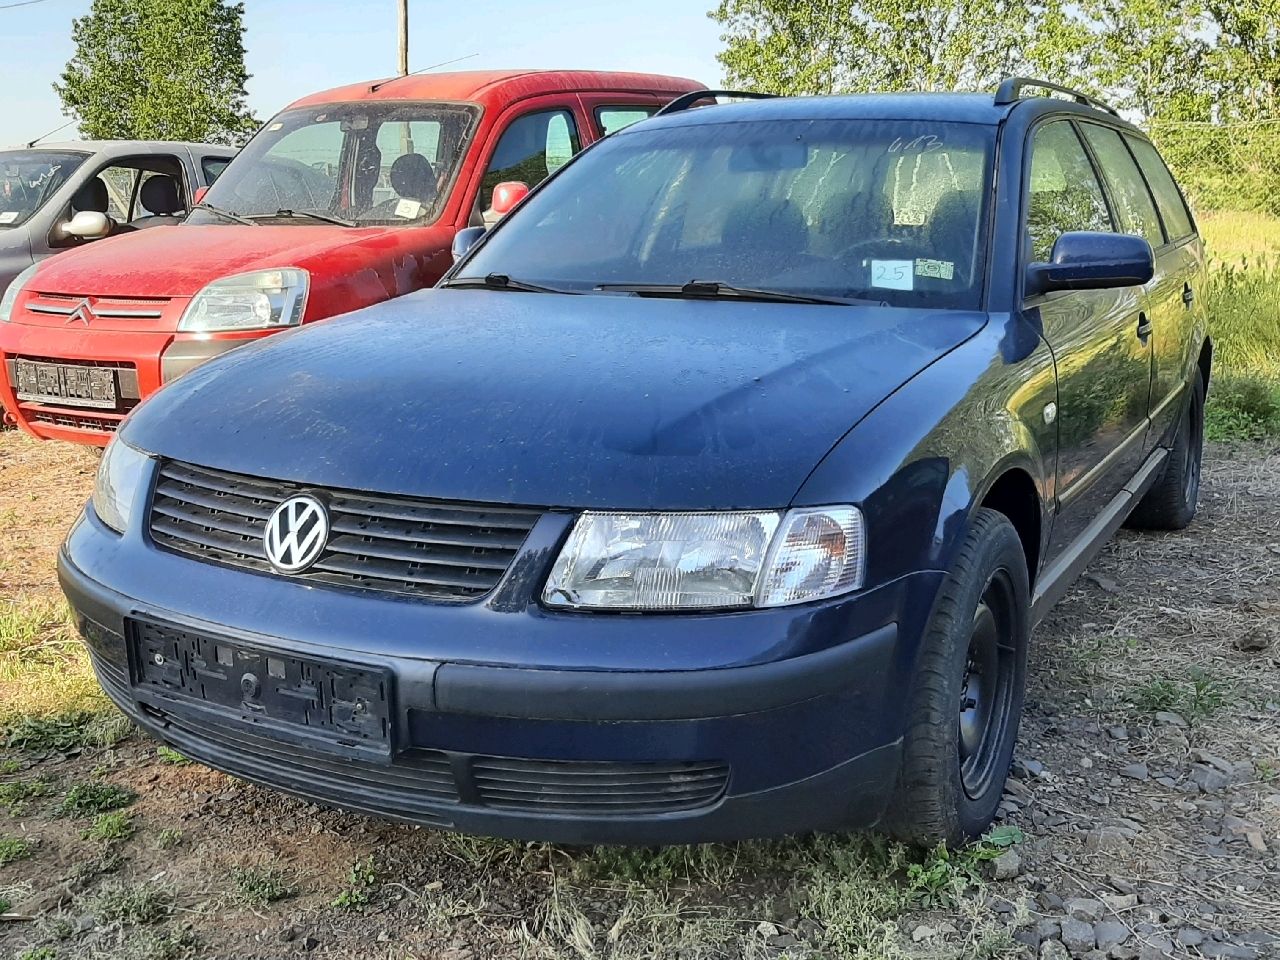 You are currently viewing 413, VolksWagen Passat